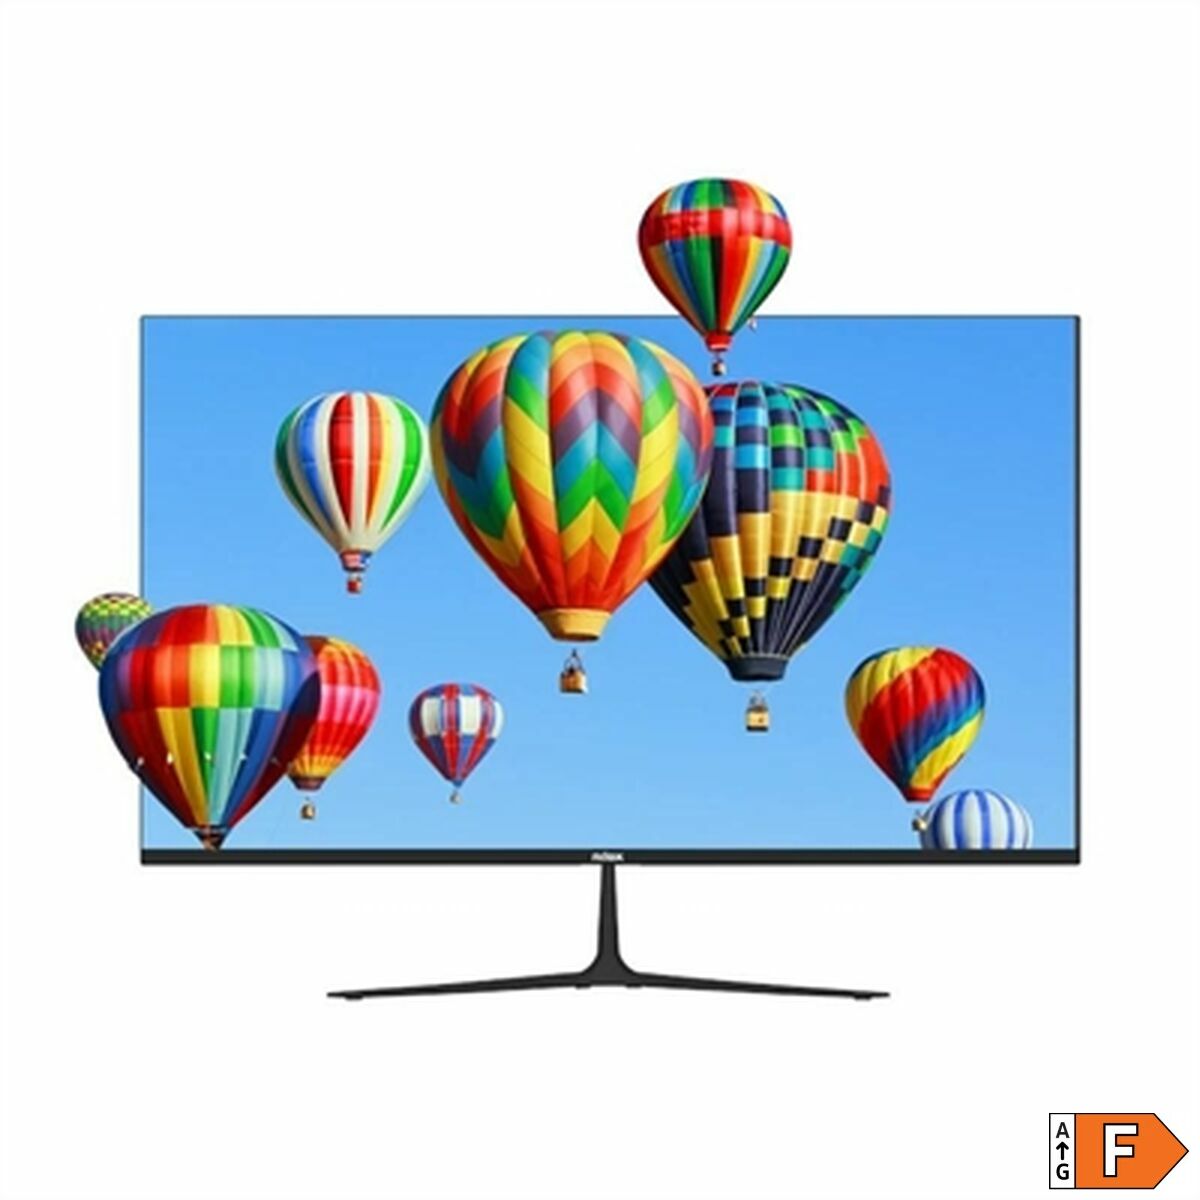 Monitor Nilox NXM27FHD03 27" IPS Full HD LED 75 Hz, Nilox, Computing, monitor-nilox-nxm27fhd03-27-ips-full-hd-led-75-hz, :Full HD, Brand_Nilox, category-reference-2609, category-reference-2642, category-reference-2644, category-reference-t-19685, computers / peripherals, Condition_NEW, office, Price_100 - 200, Teleworking, RiotNook